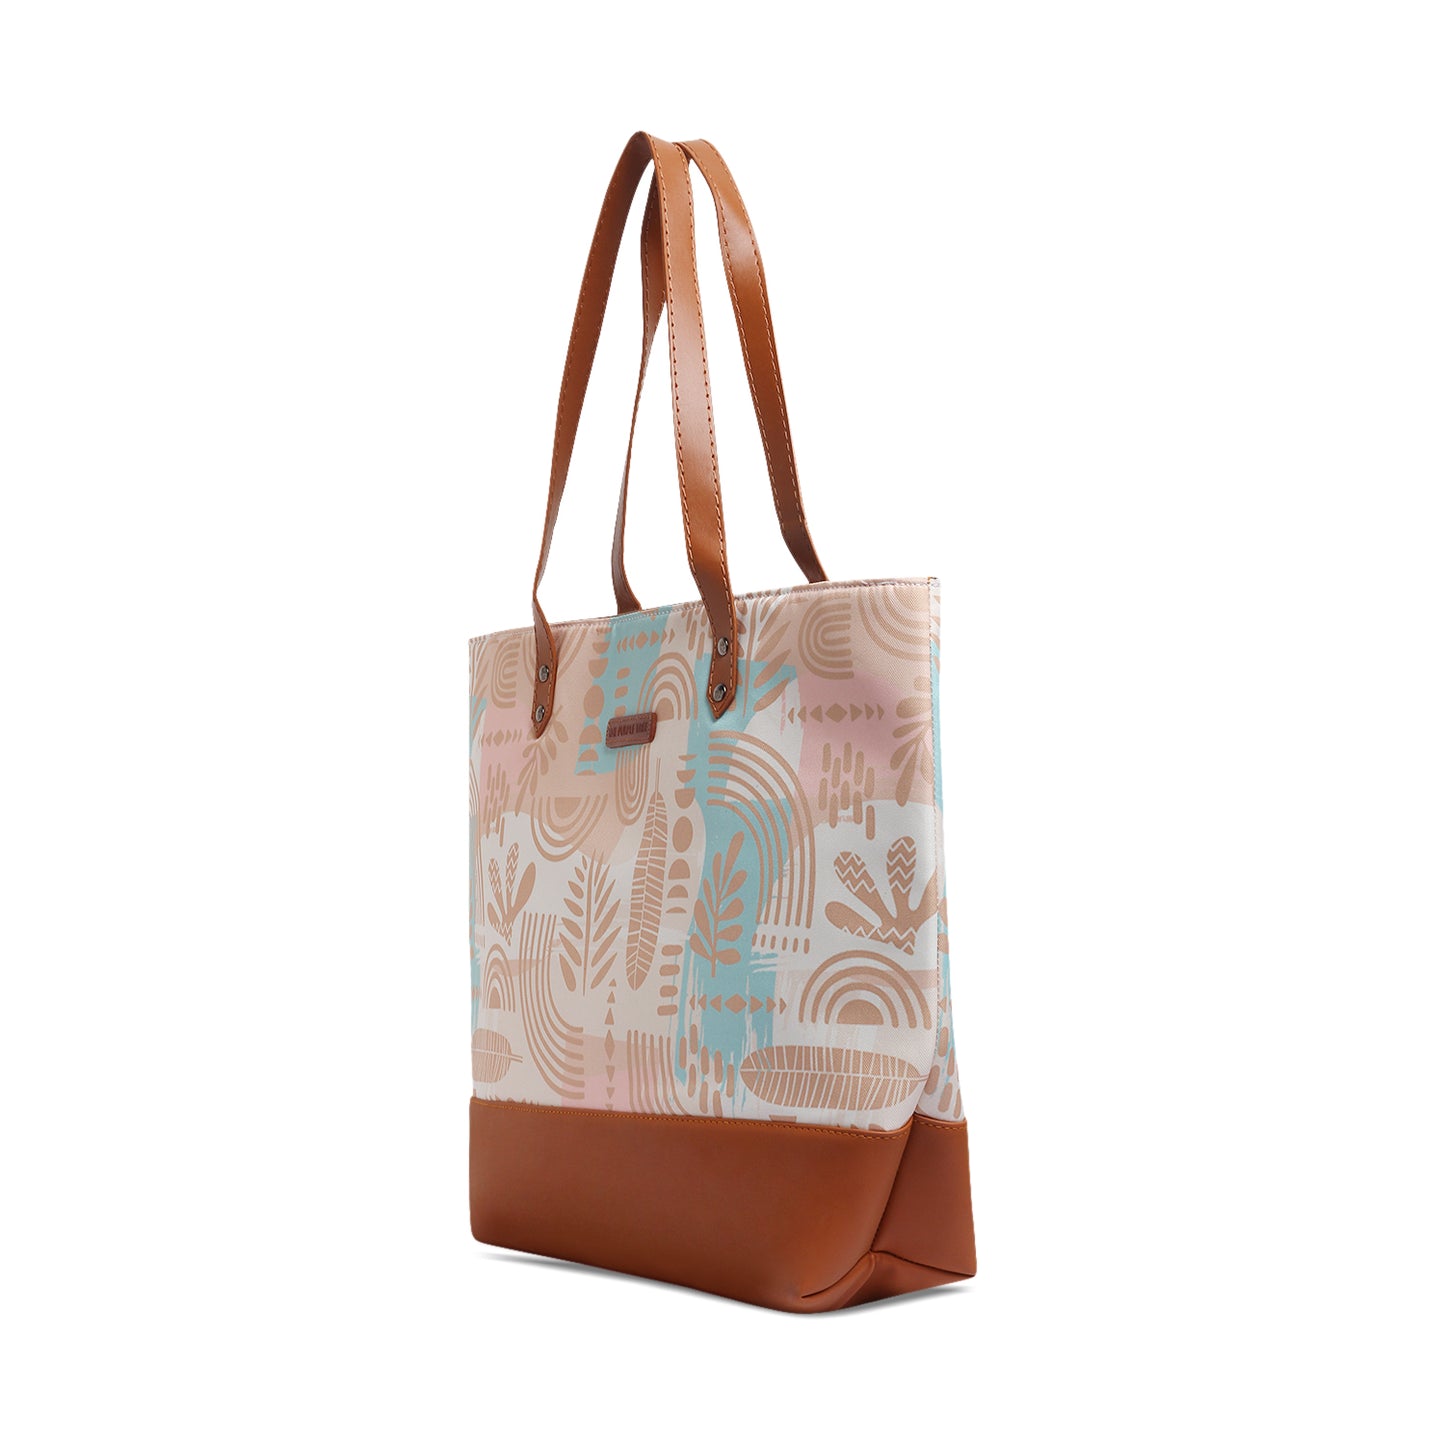 A stylish tote bag with a light blue and pink pattern, perfect for adding a pop of color to any outfit.